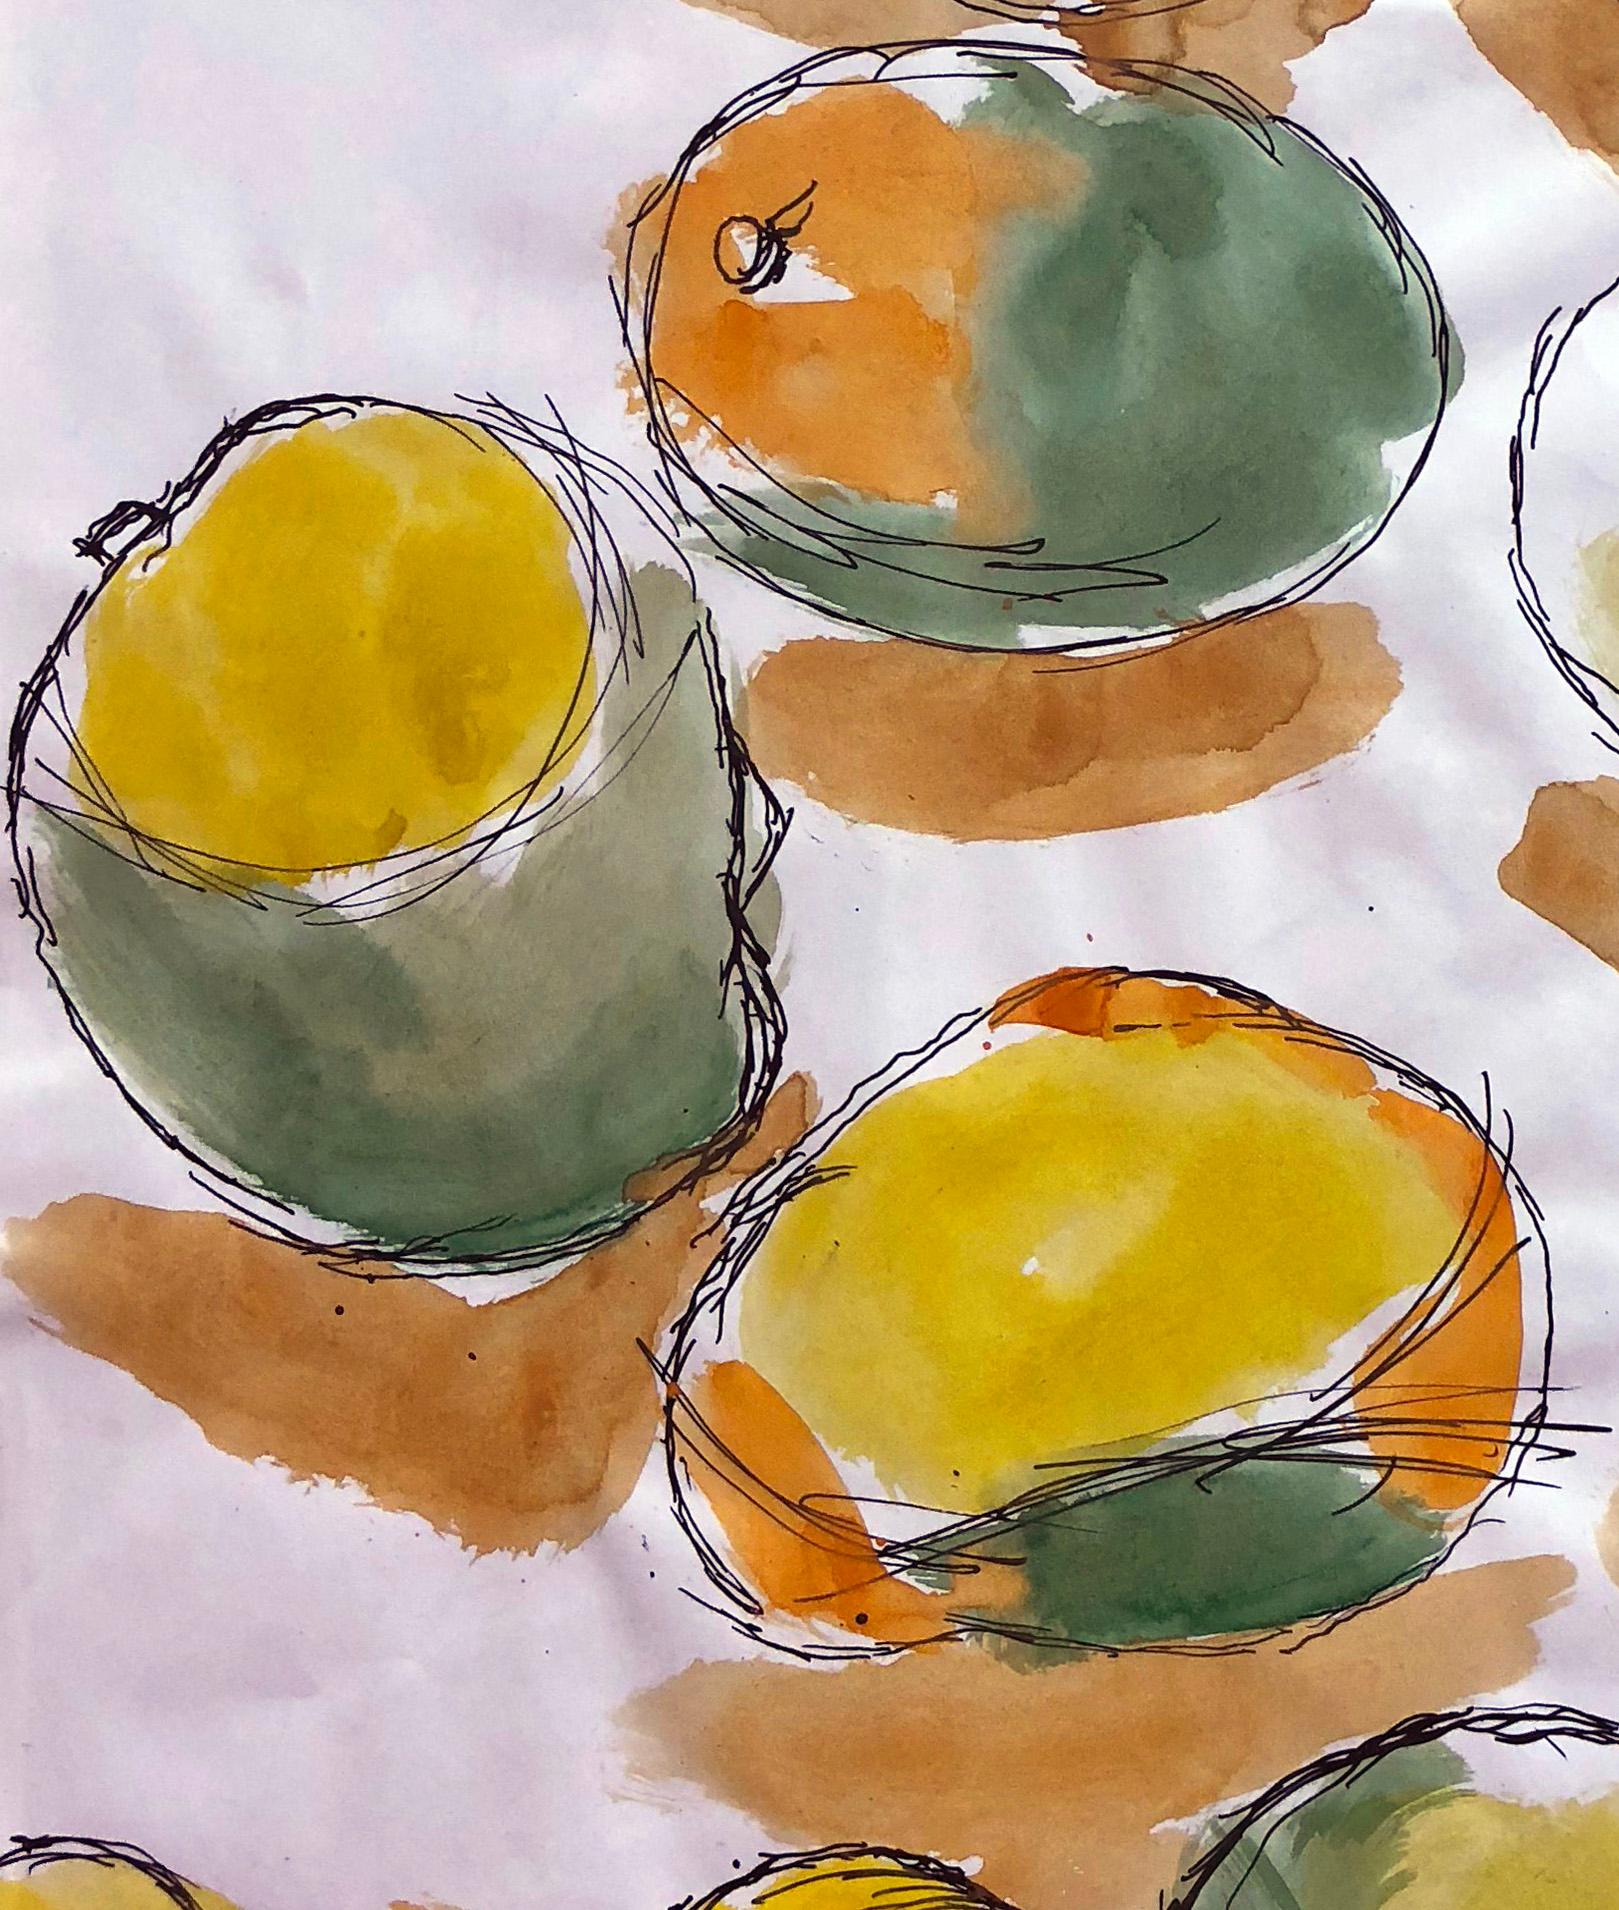 Other Mangos, Watercolor and Ink on Archival Paper, 2018